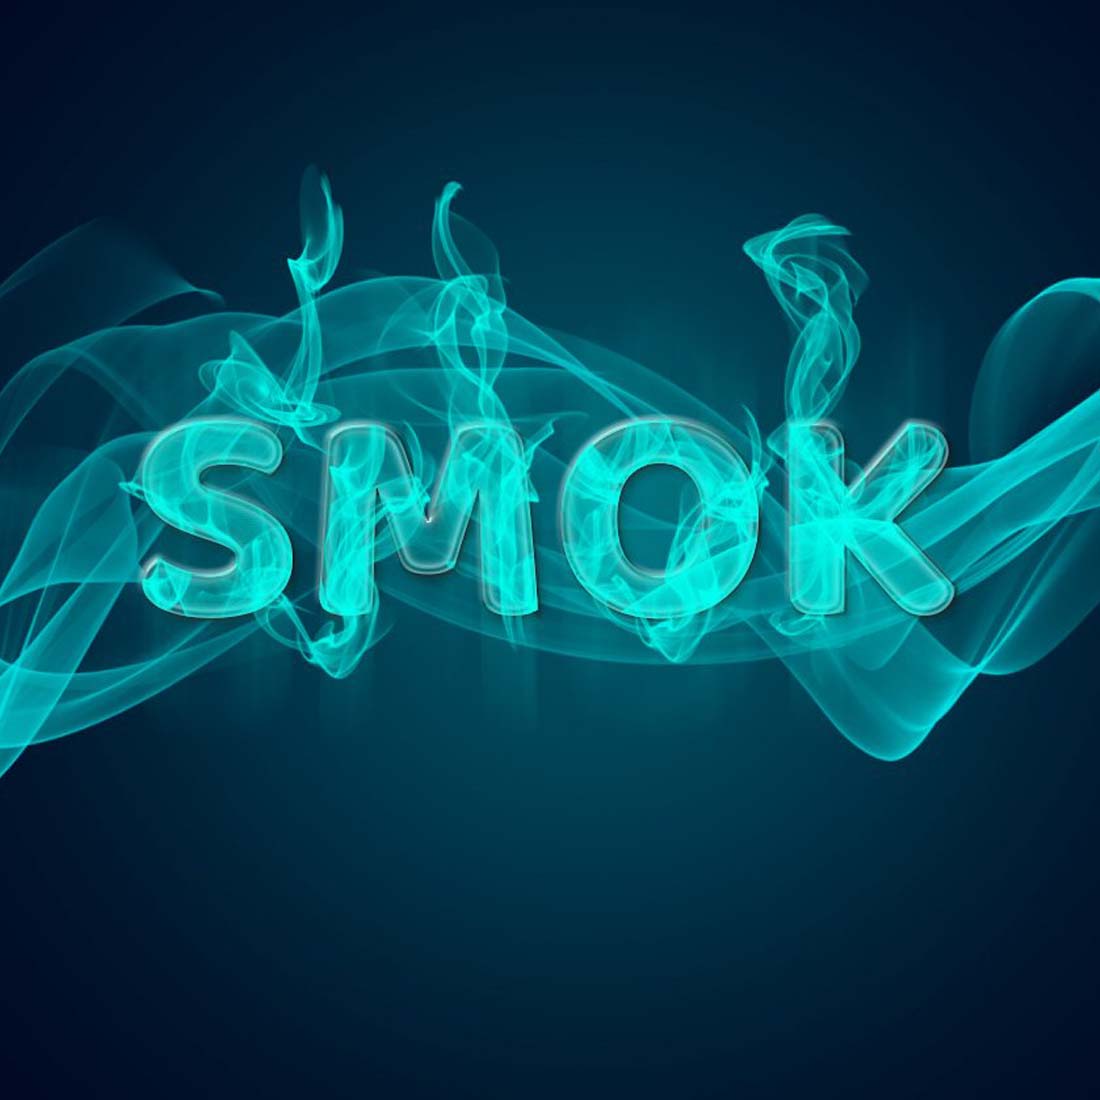 Smoke Photoshop Brushes preview image.